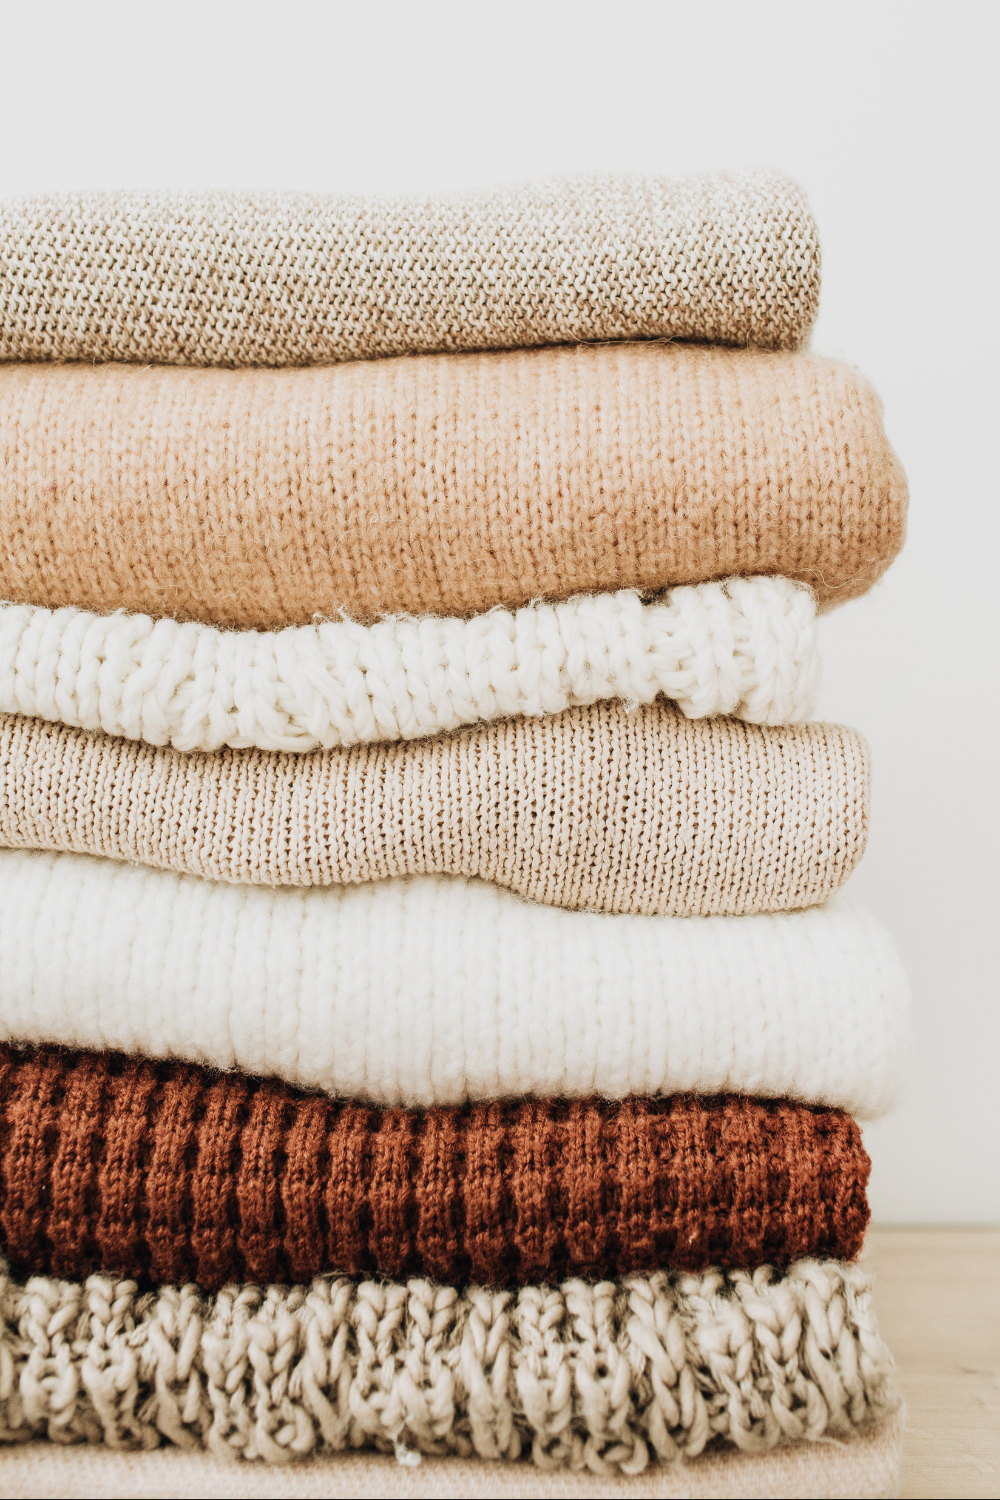 Cozy clothes in a neutral tone